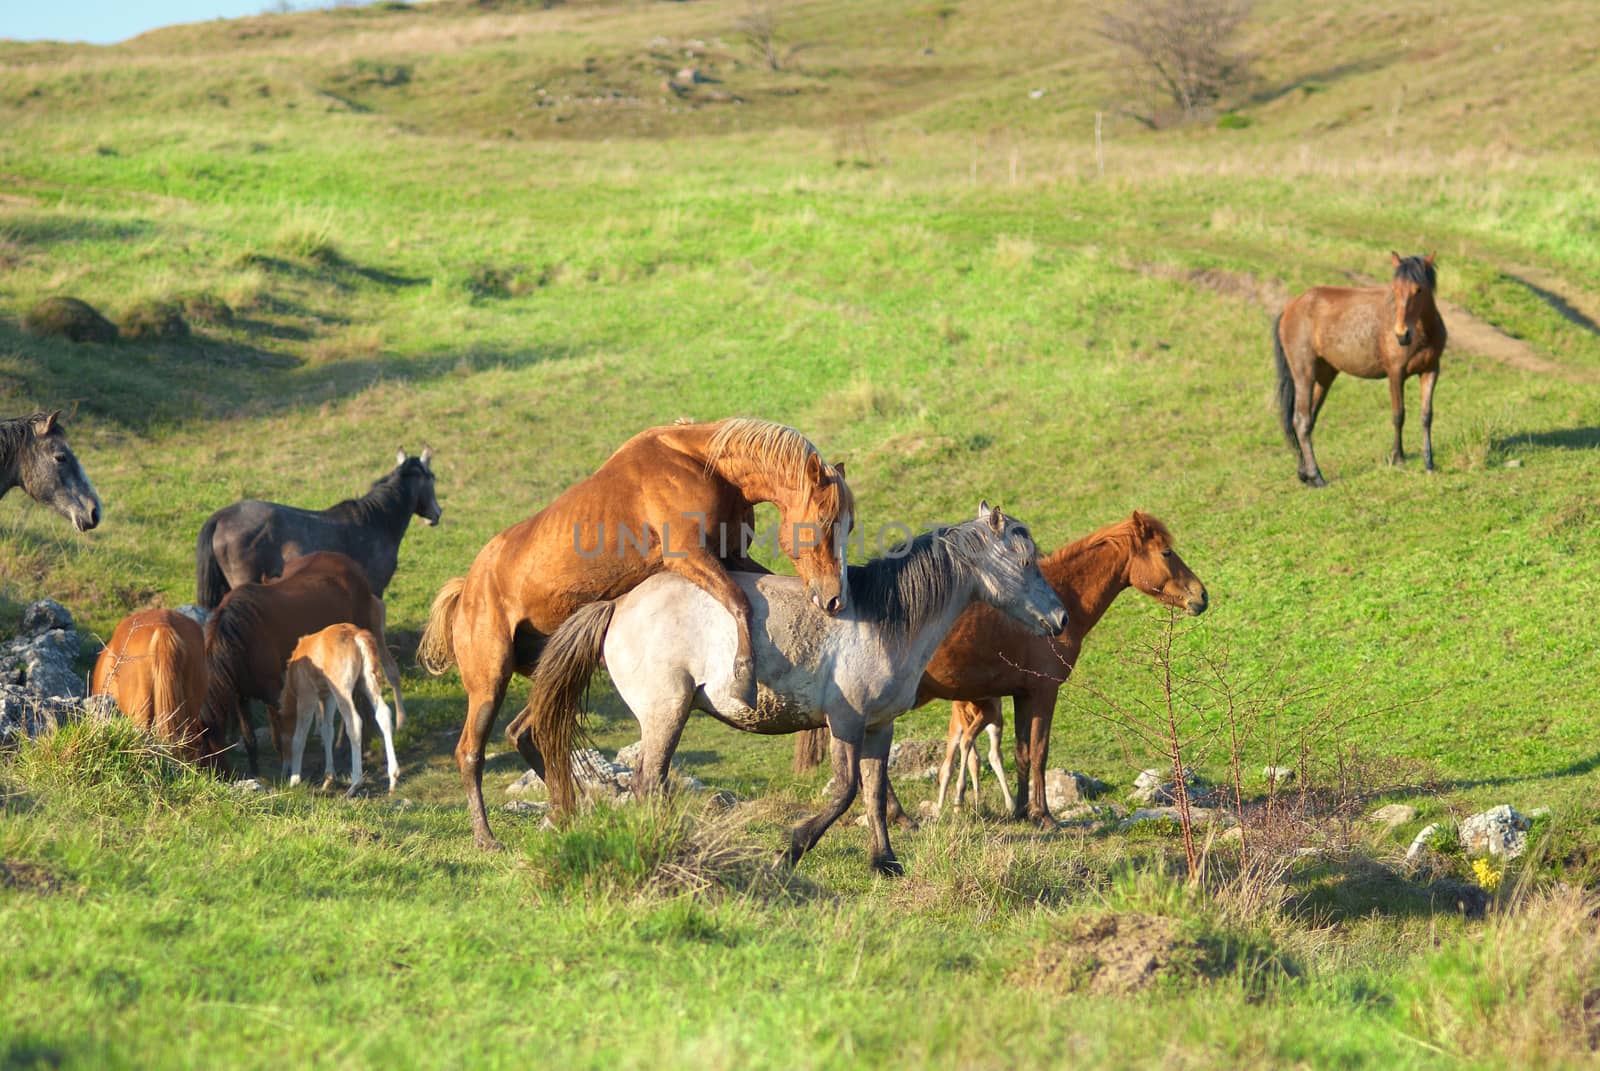 Herd of horses on the field with green grass